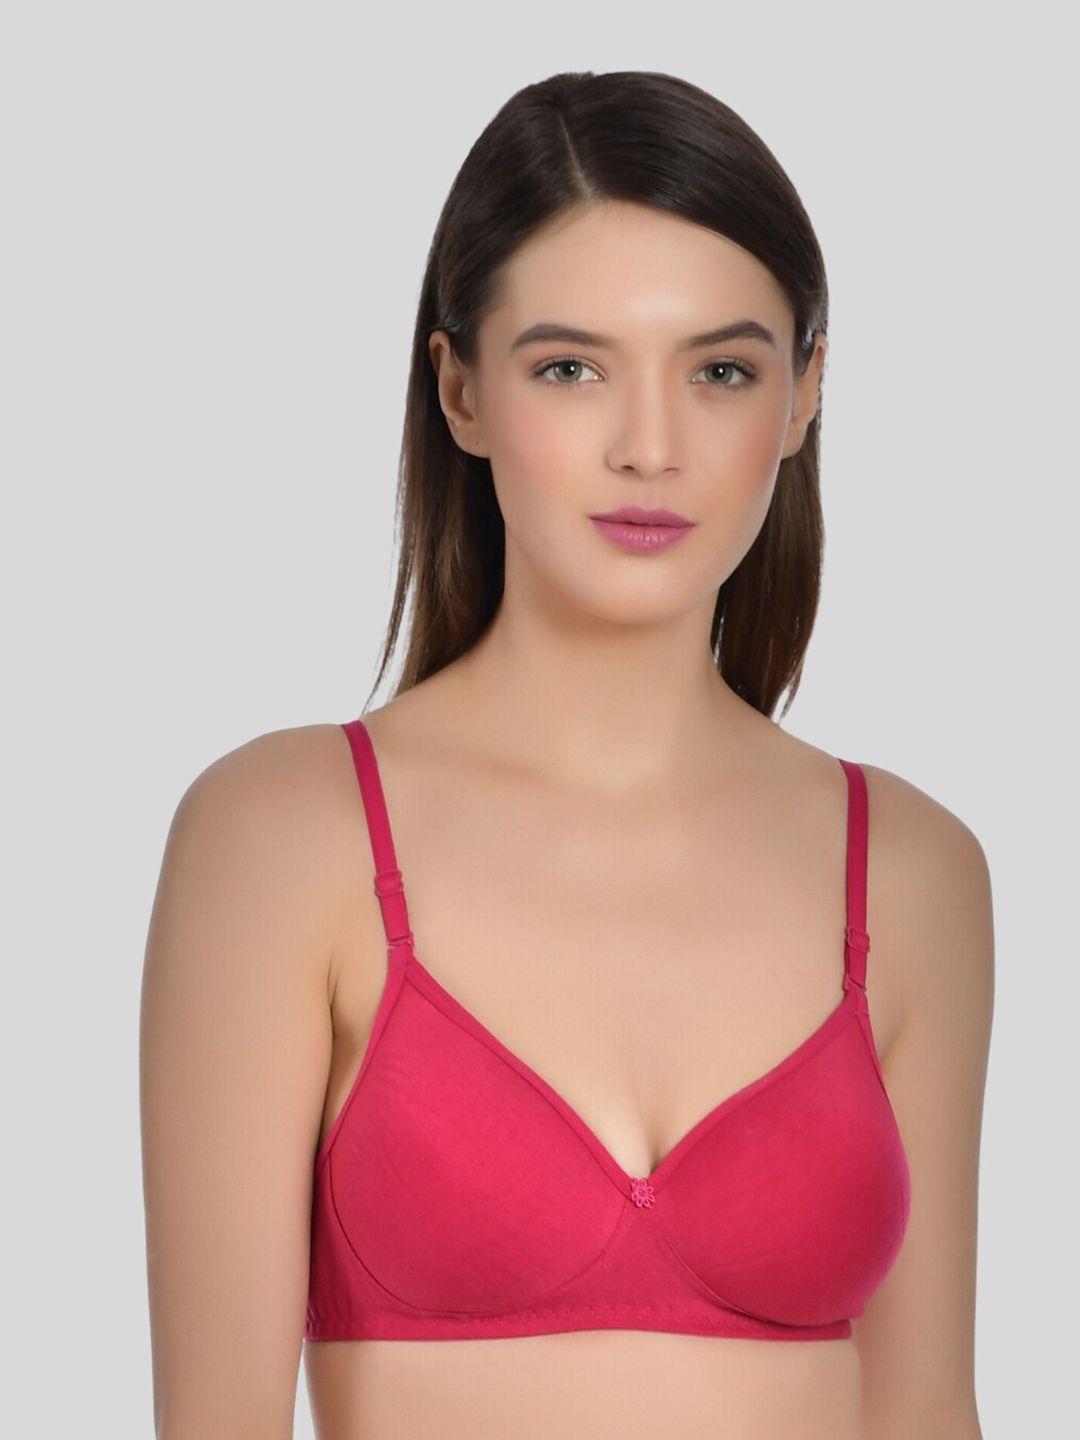 aimly seamless full coverage all day comfort non-wired heavily padded cotton t-shirt bra